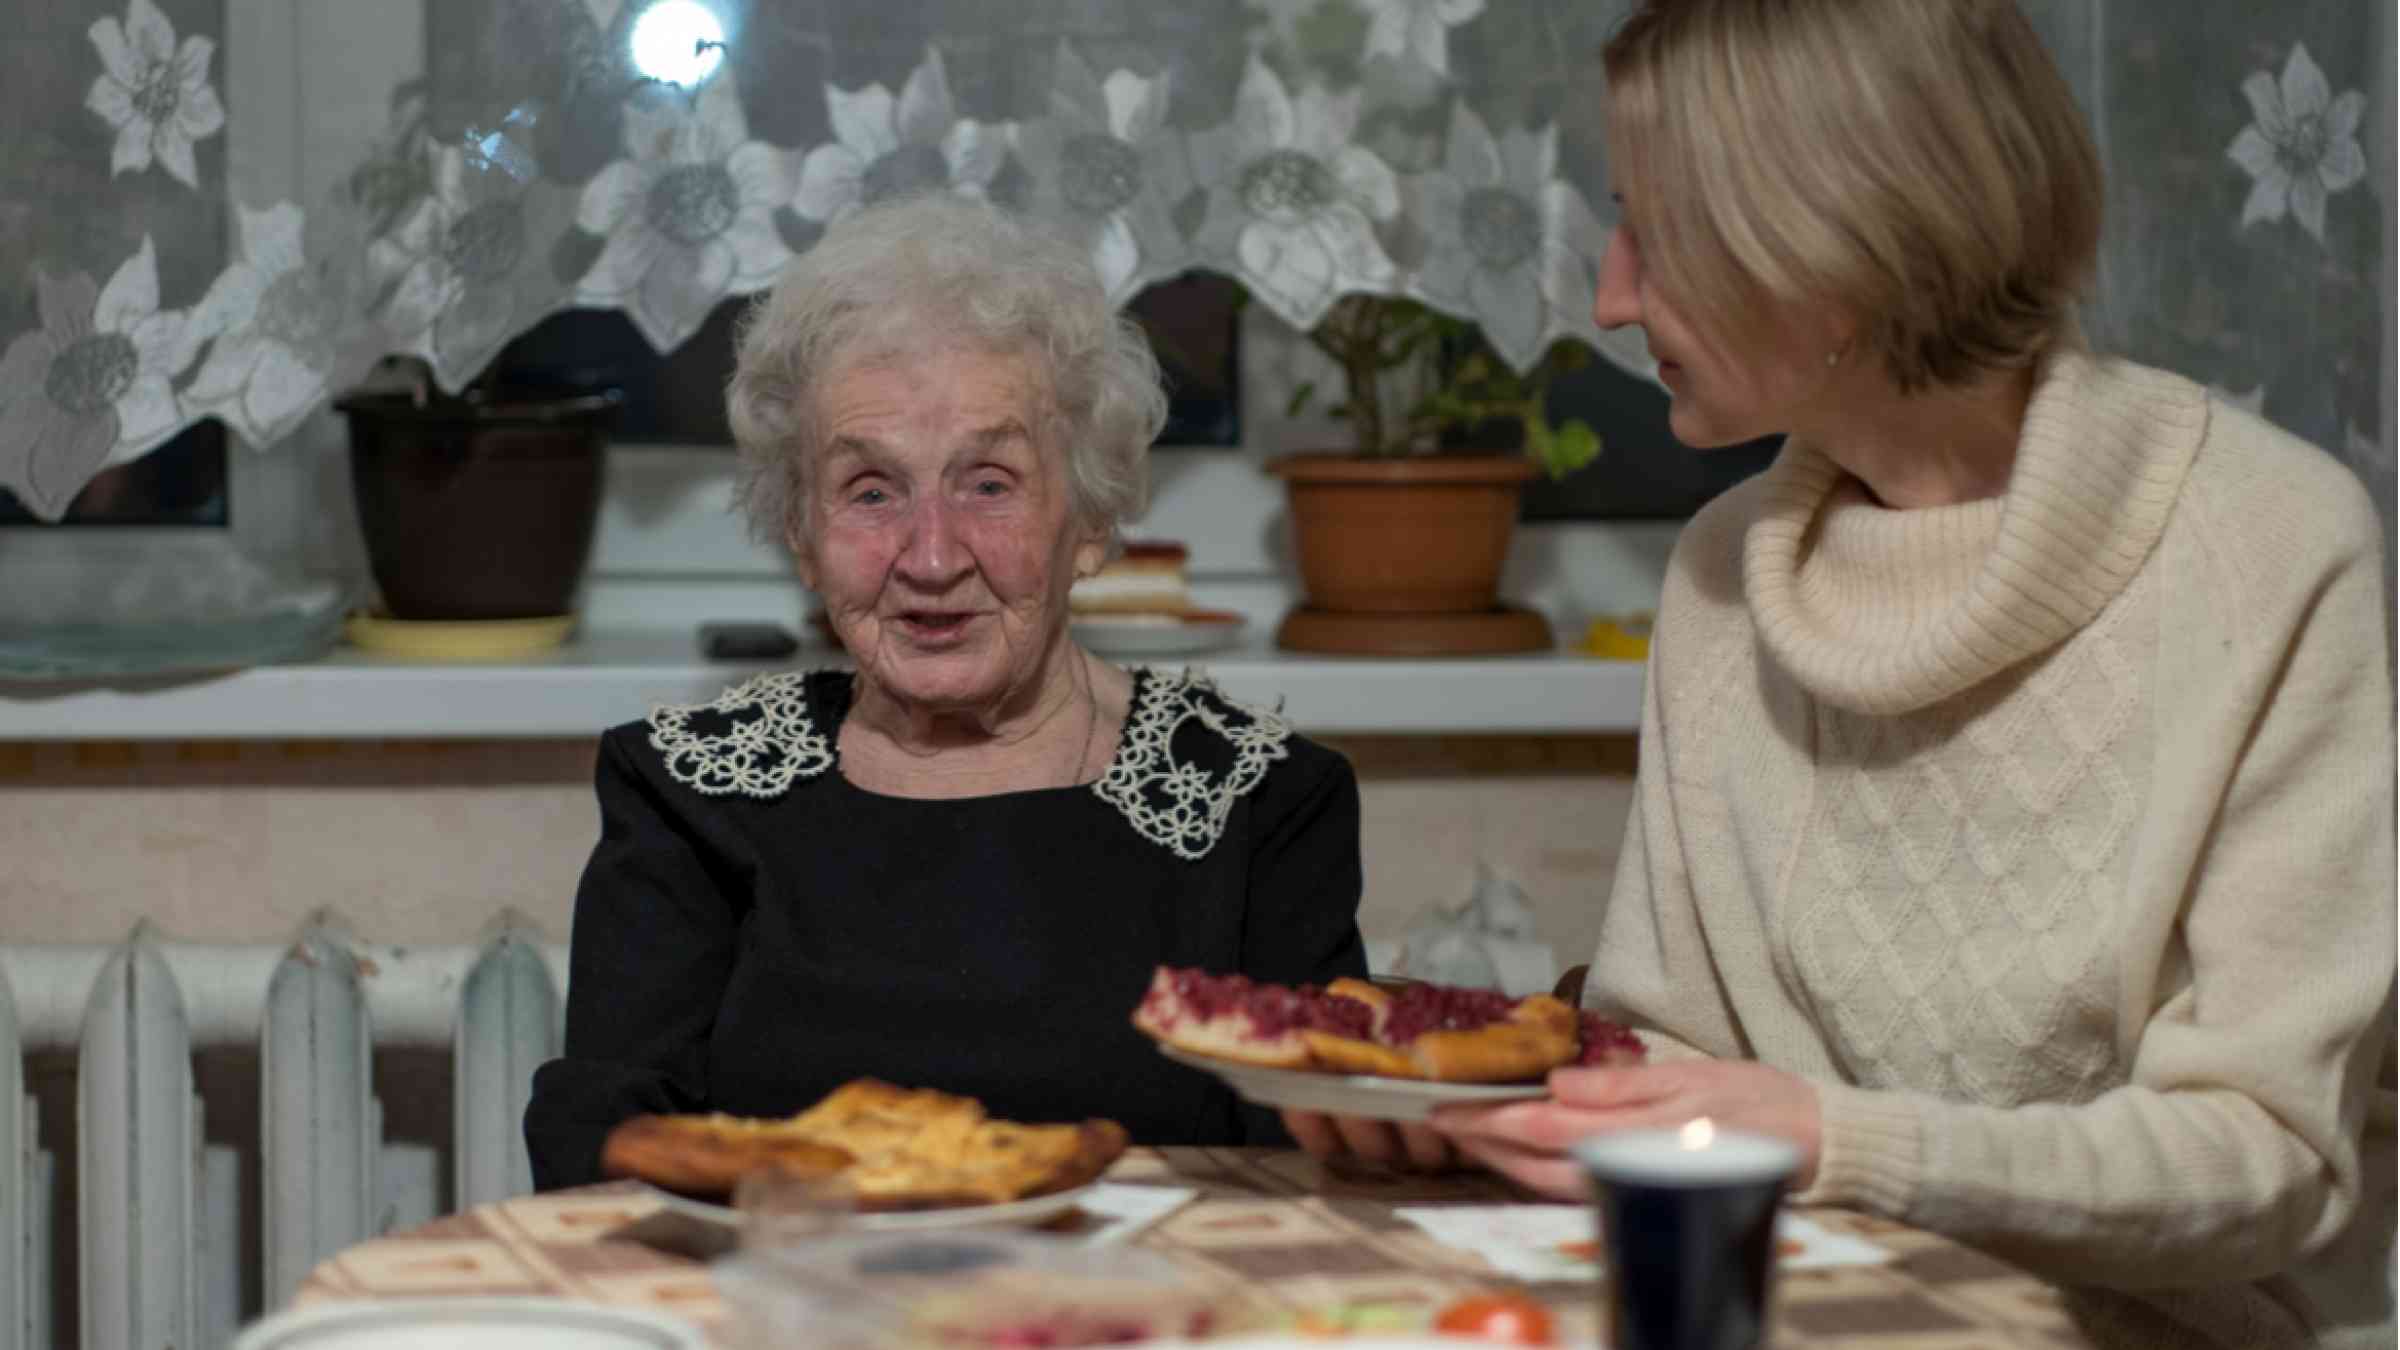 An older woman enjoys dinner with her daughter